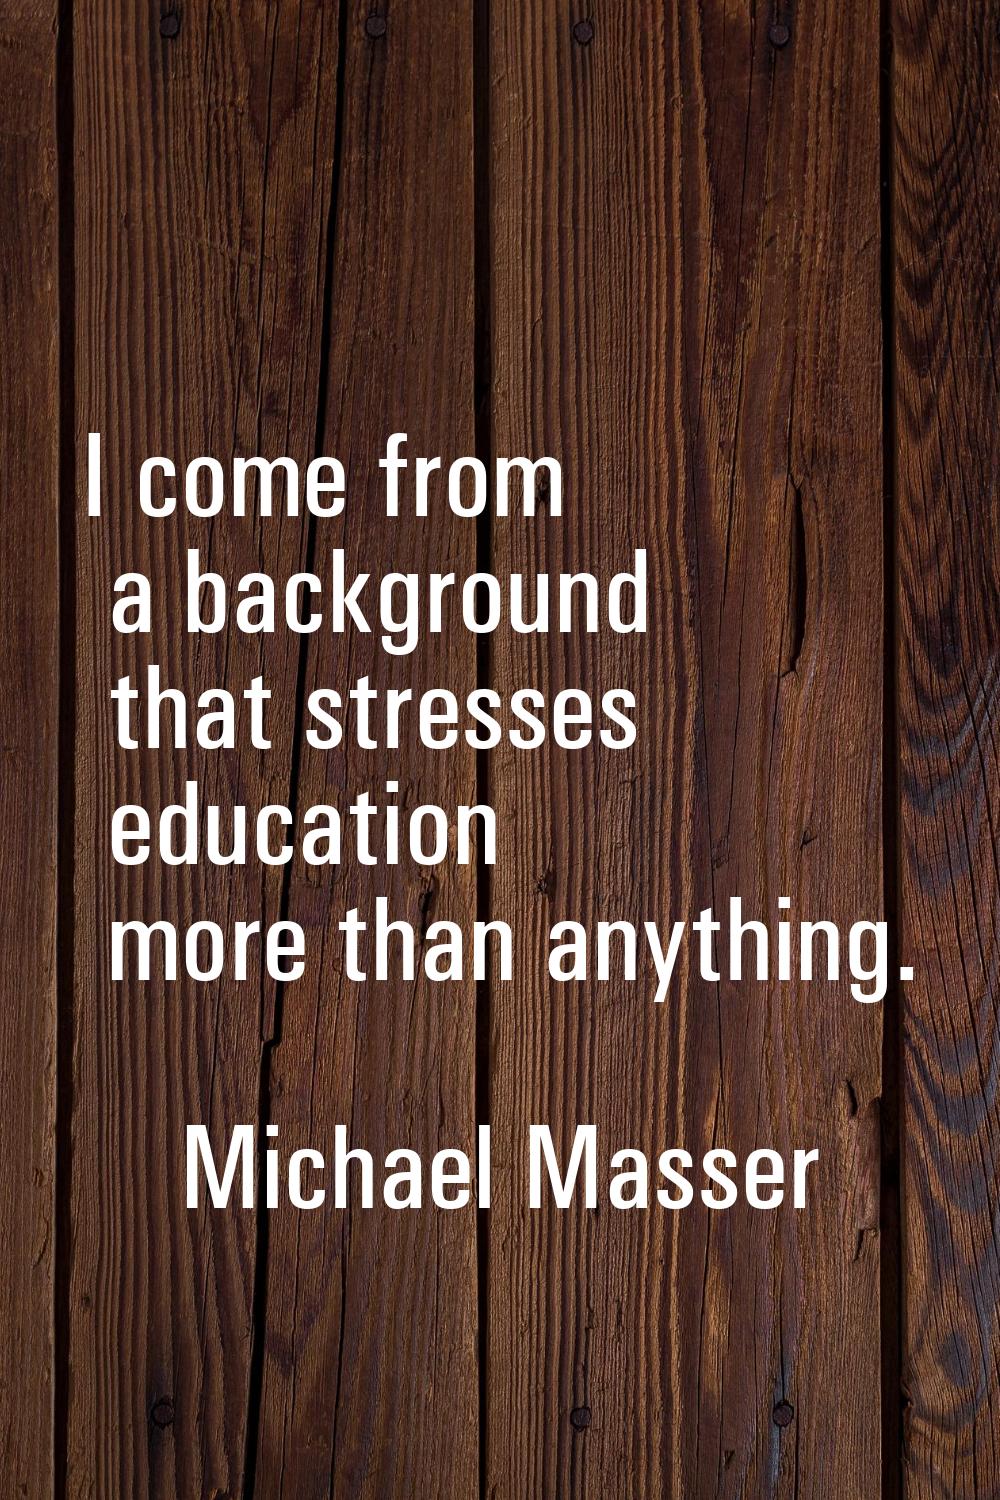 I come from a background that stresses education more than anything.